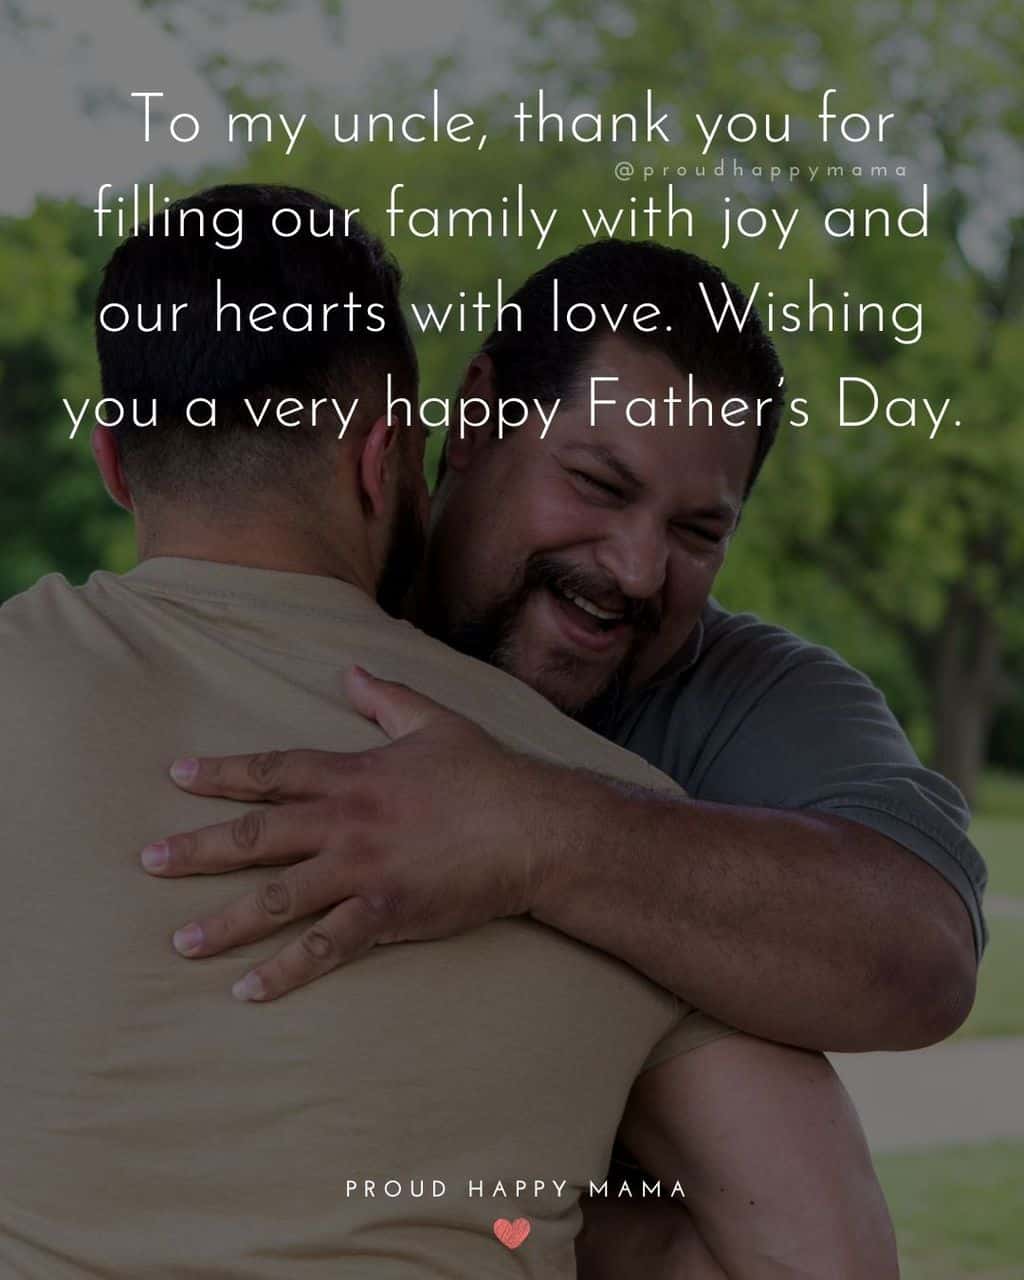 30-happy-father-s-day-uncle-quotes-with-images